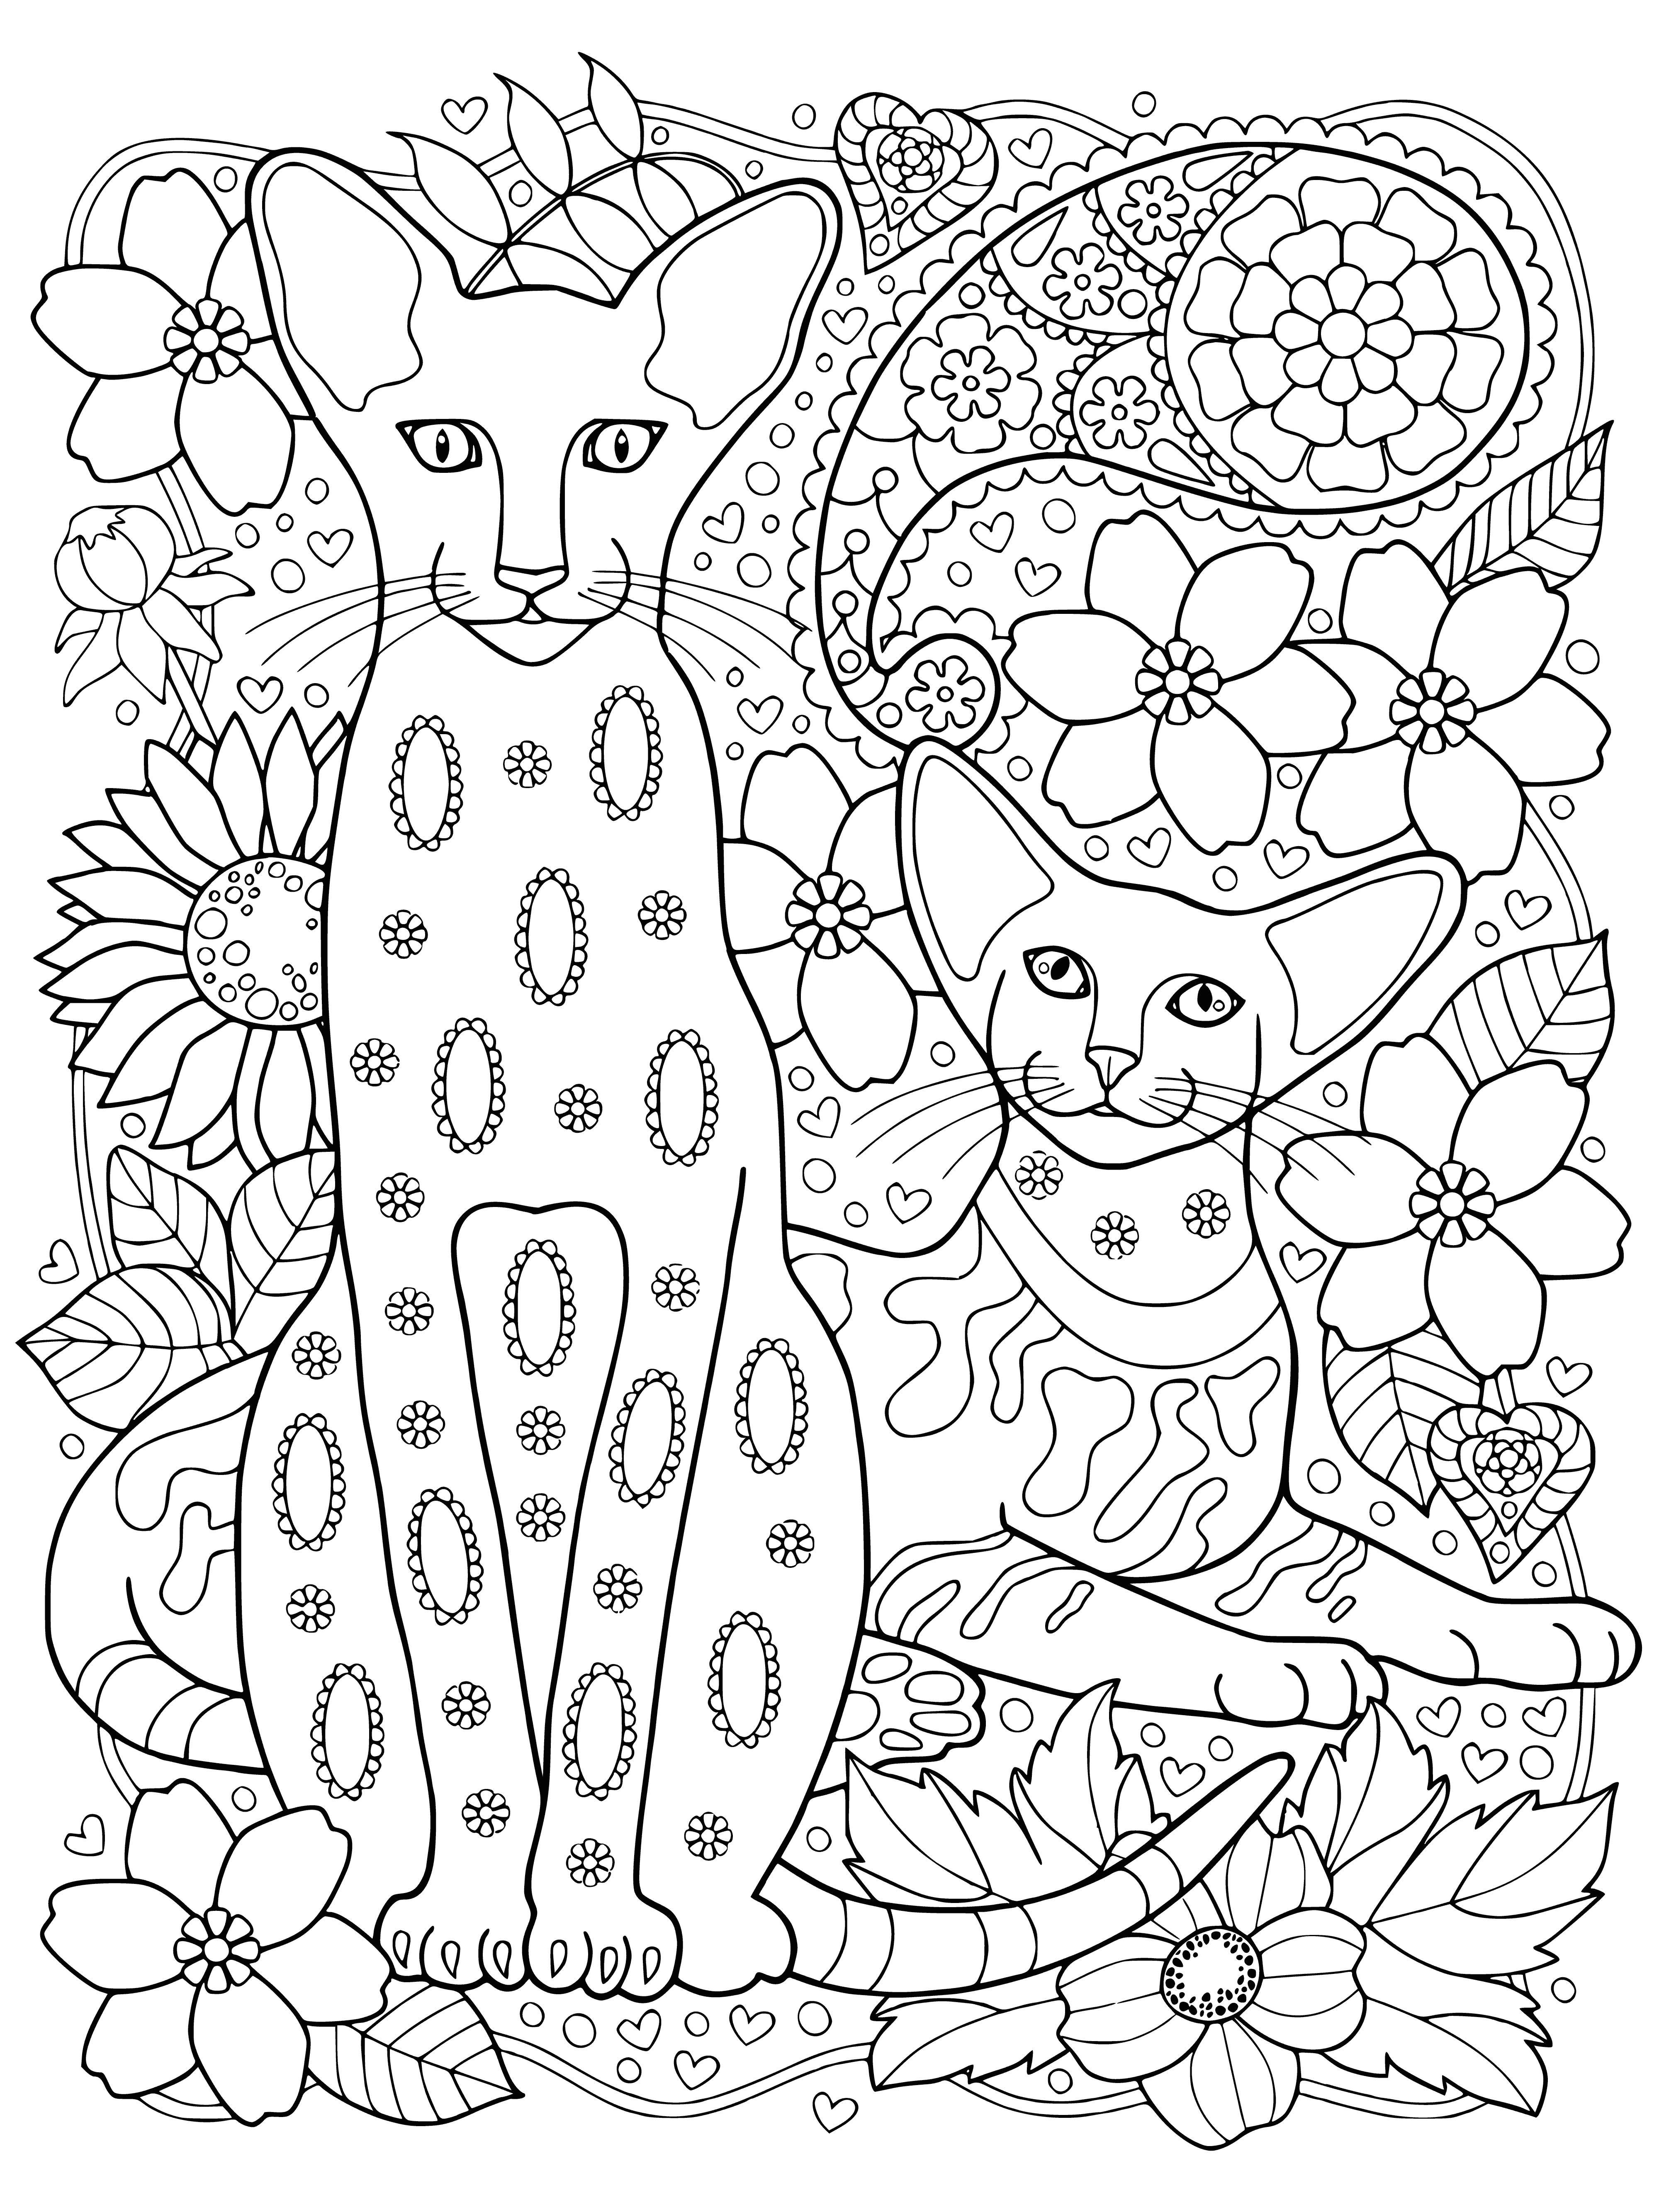 Sphynx cats coloring page